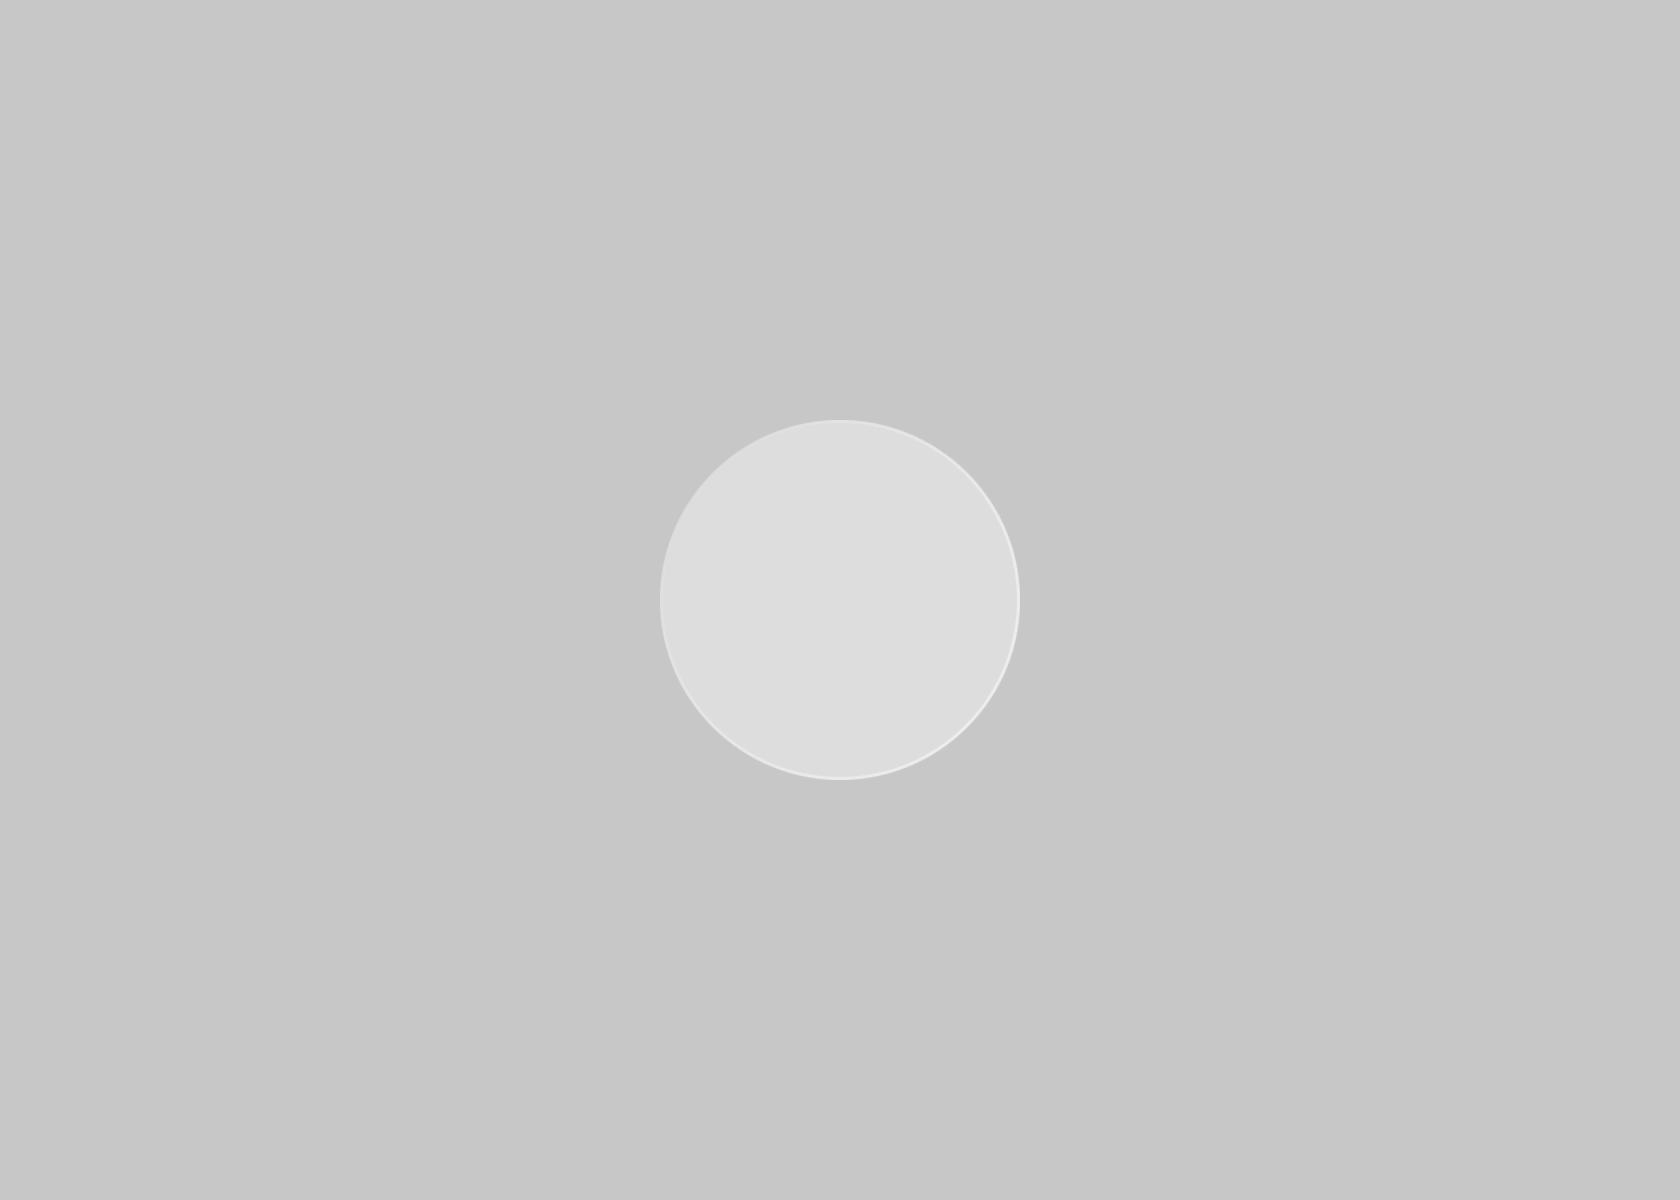 A white circle object fades in and out.